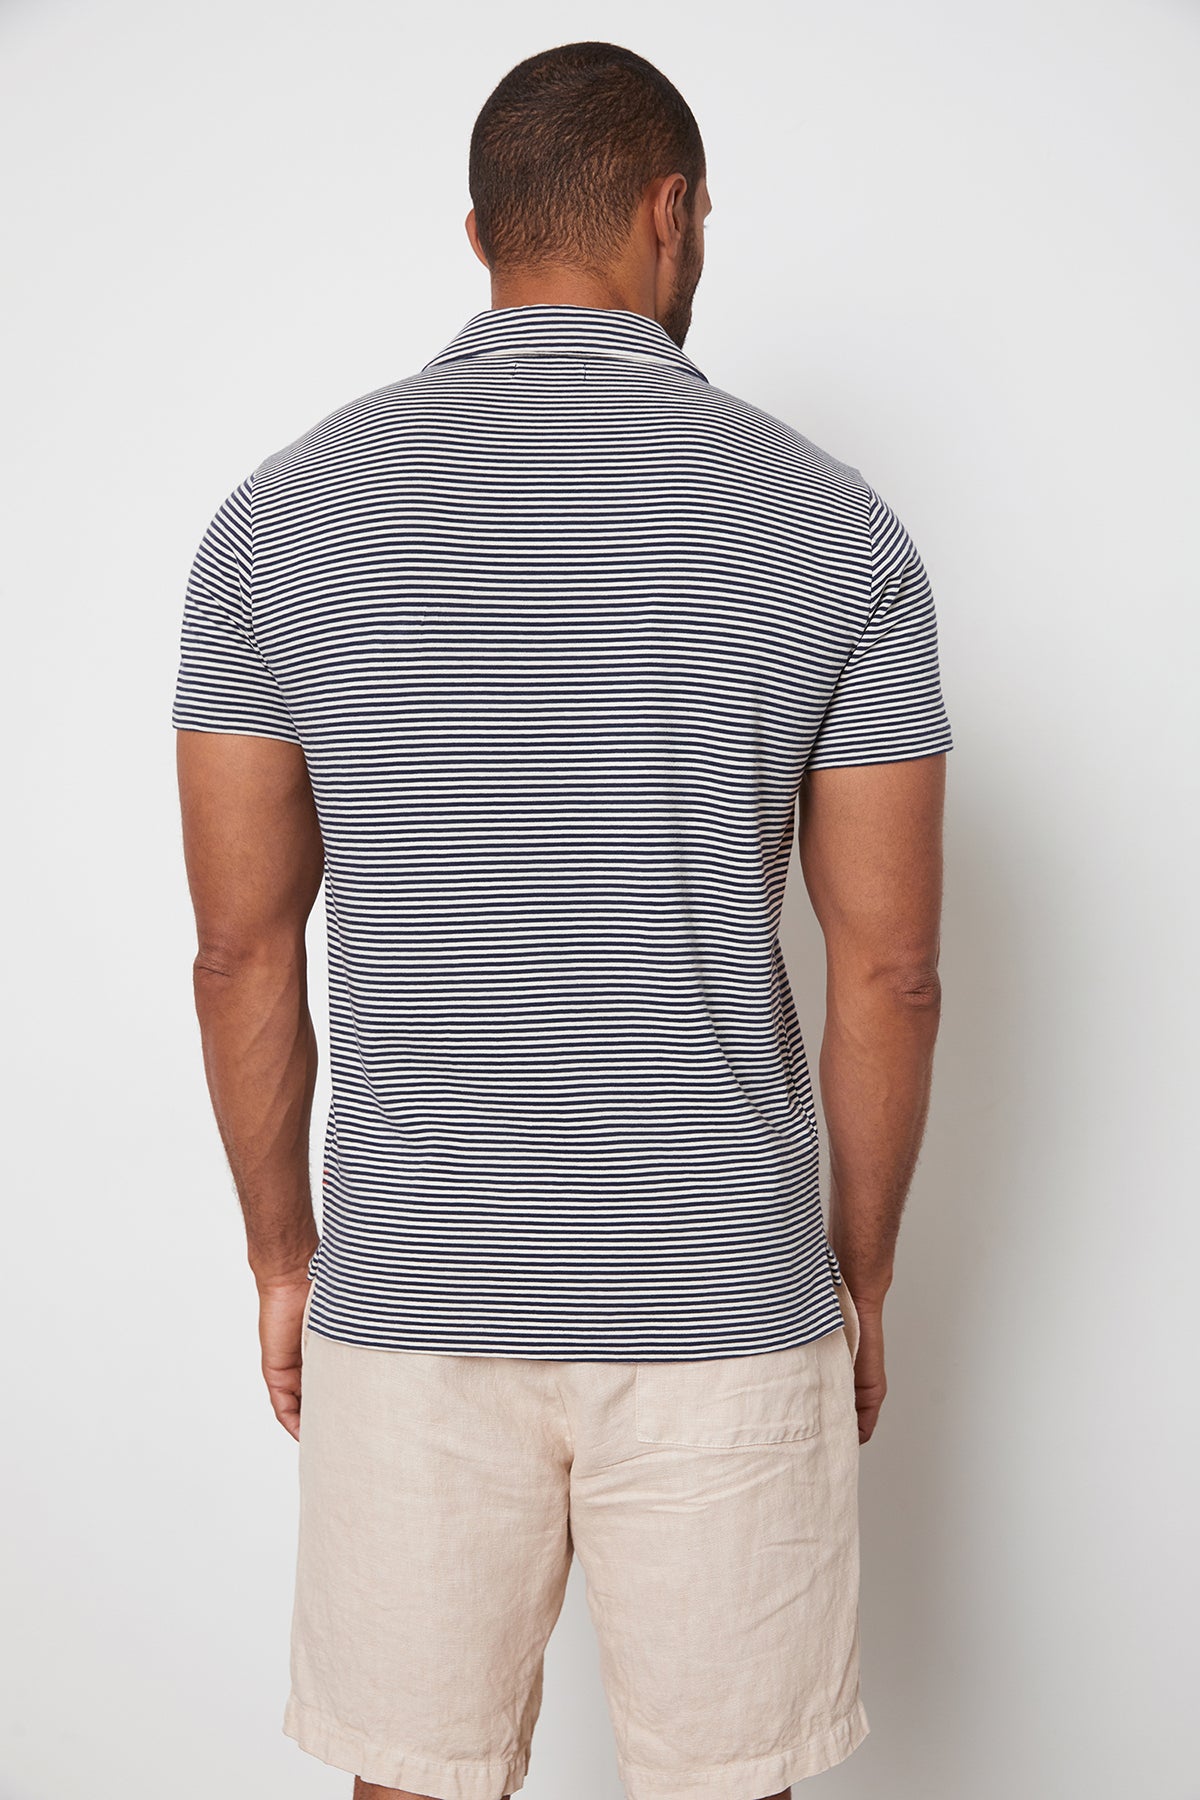 William Striped Polo with Navy Stripes and Jonathan Shorts in Tea Back-24705848639681